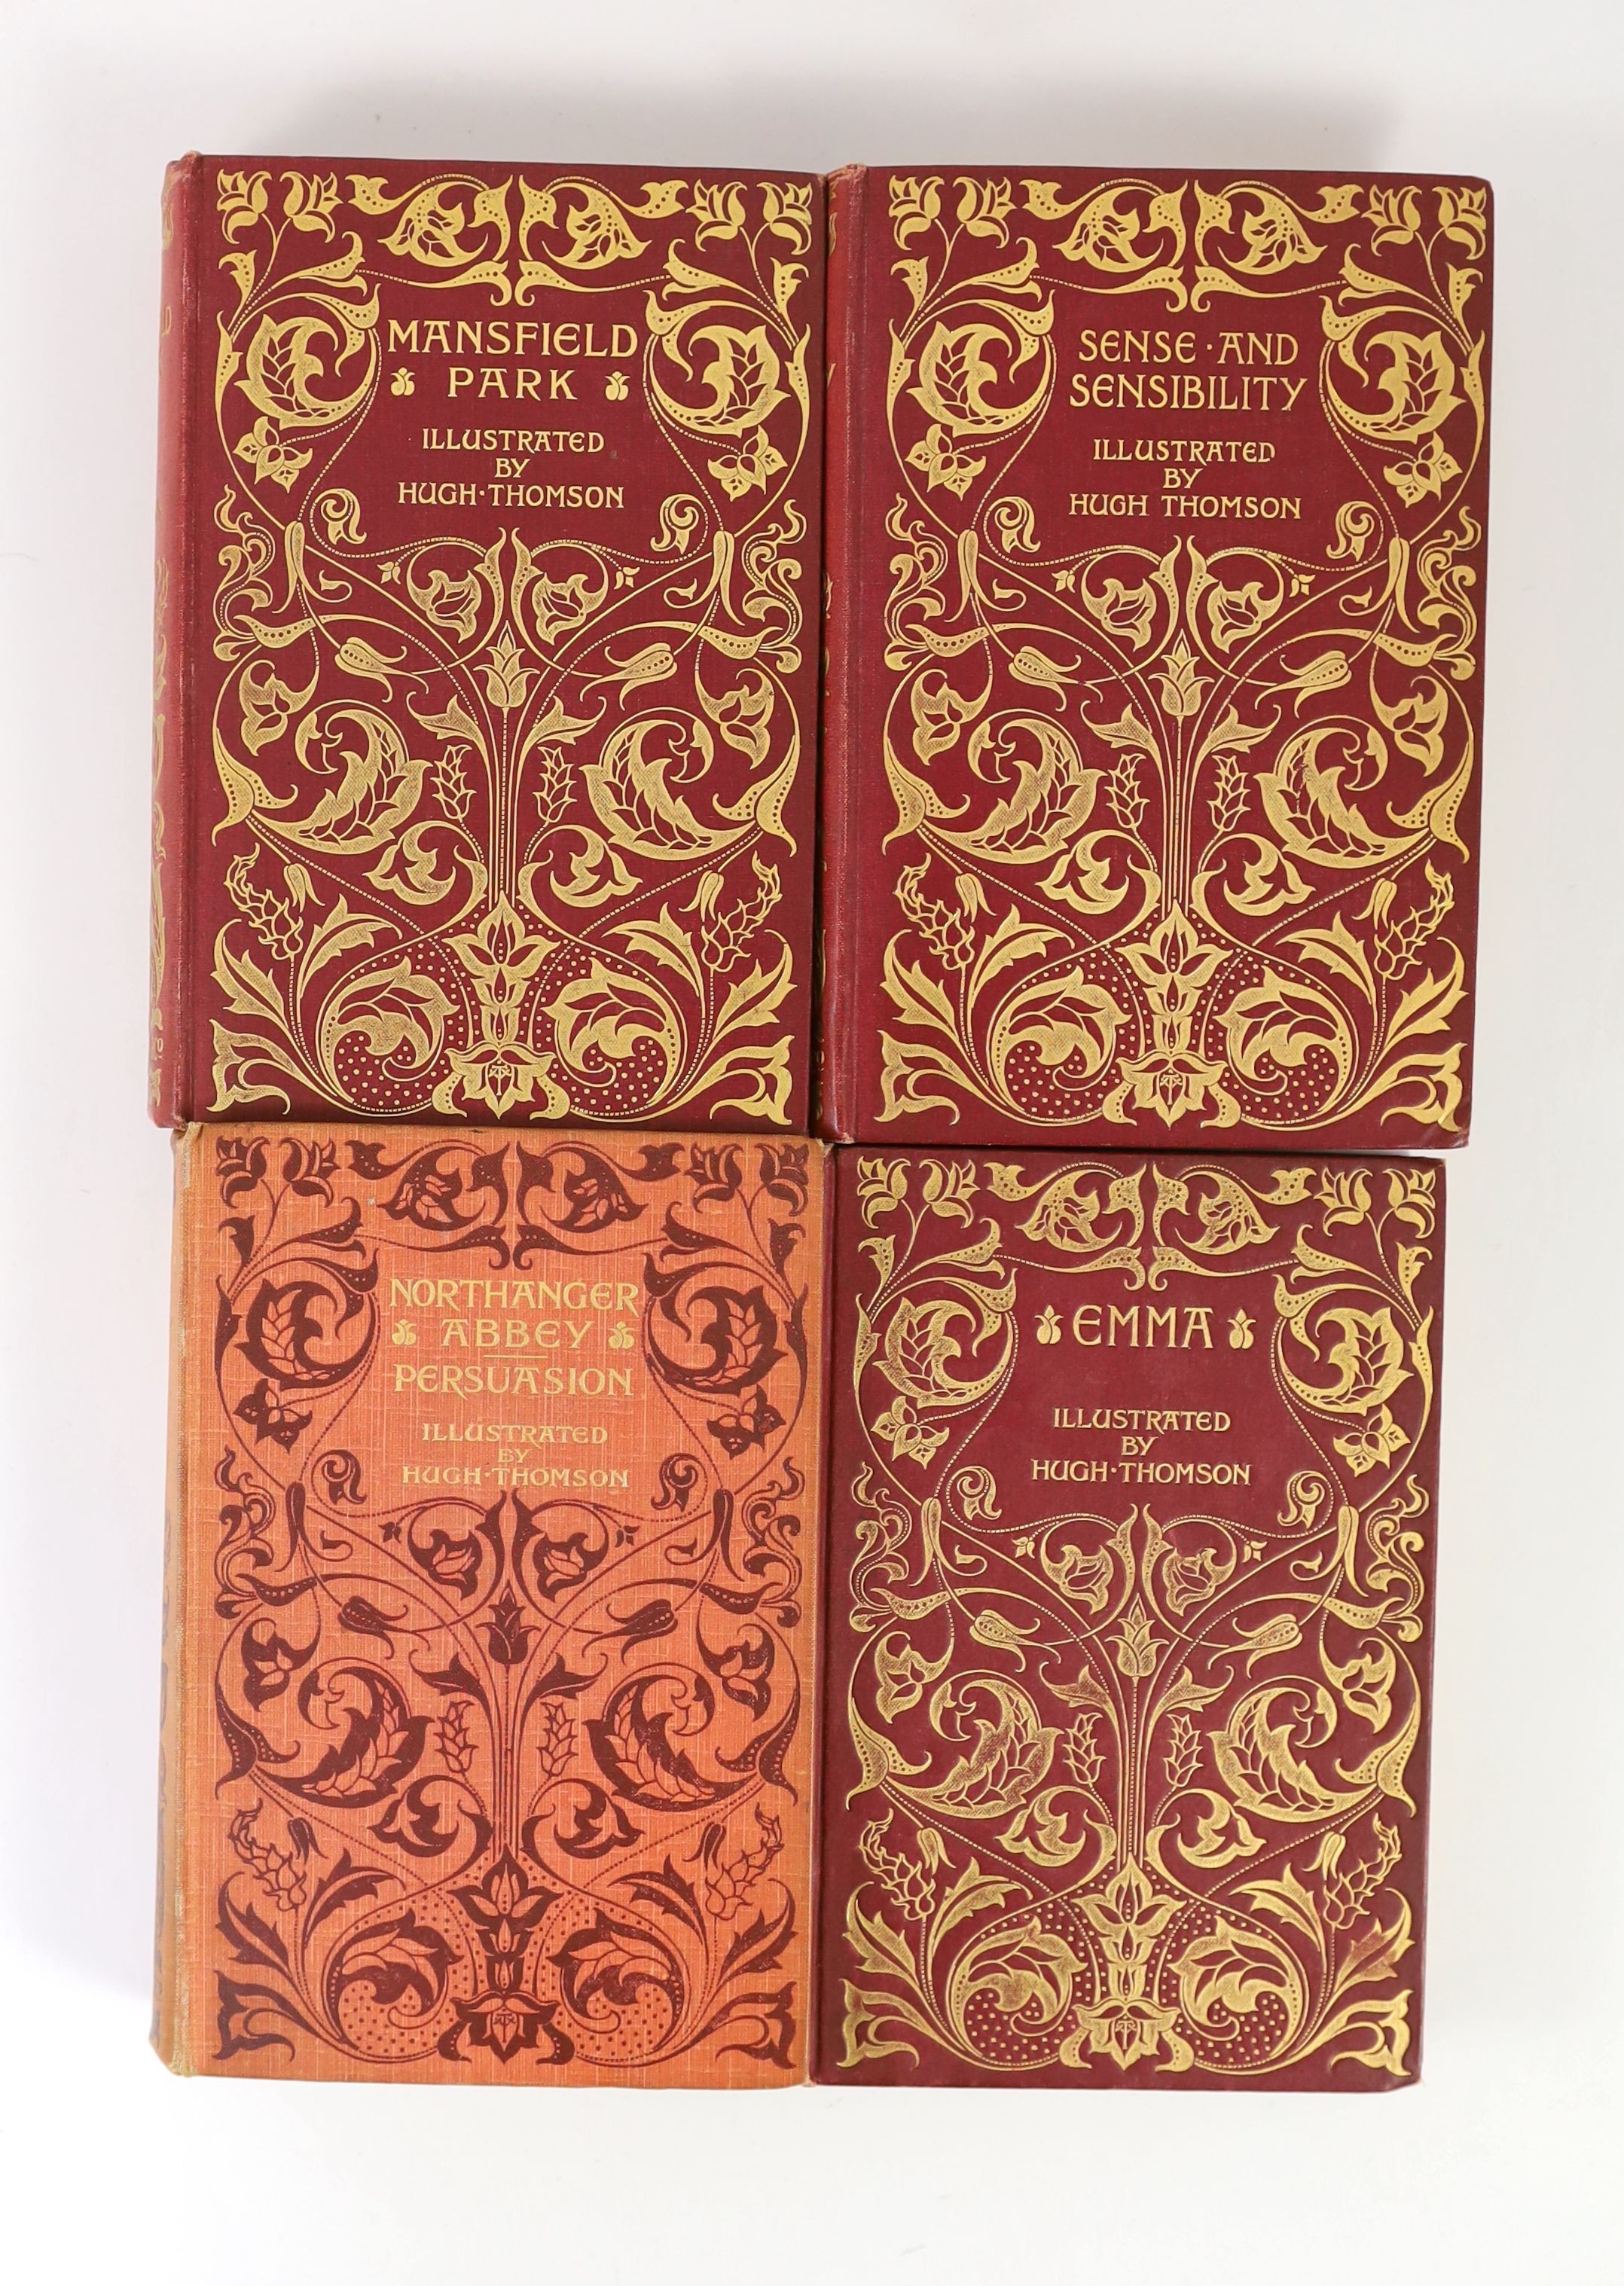 Austen, Jane - Macmillan's Illustrated Standard Novels, comprising: Sense and Sensibility; Emma; Mansfield Park; Northanger Abbey and Persuasion; i.e. 4 vols (ex 5 -without Pride and Prejudice); publisher's introductions